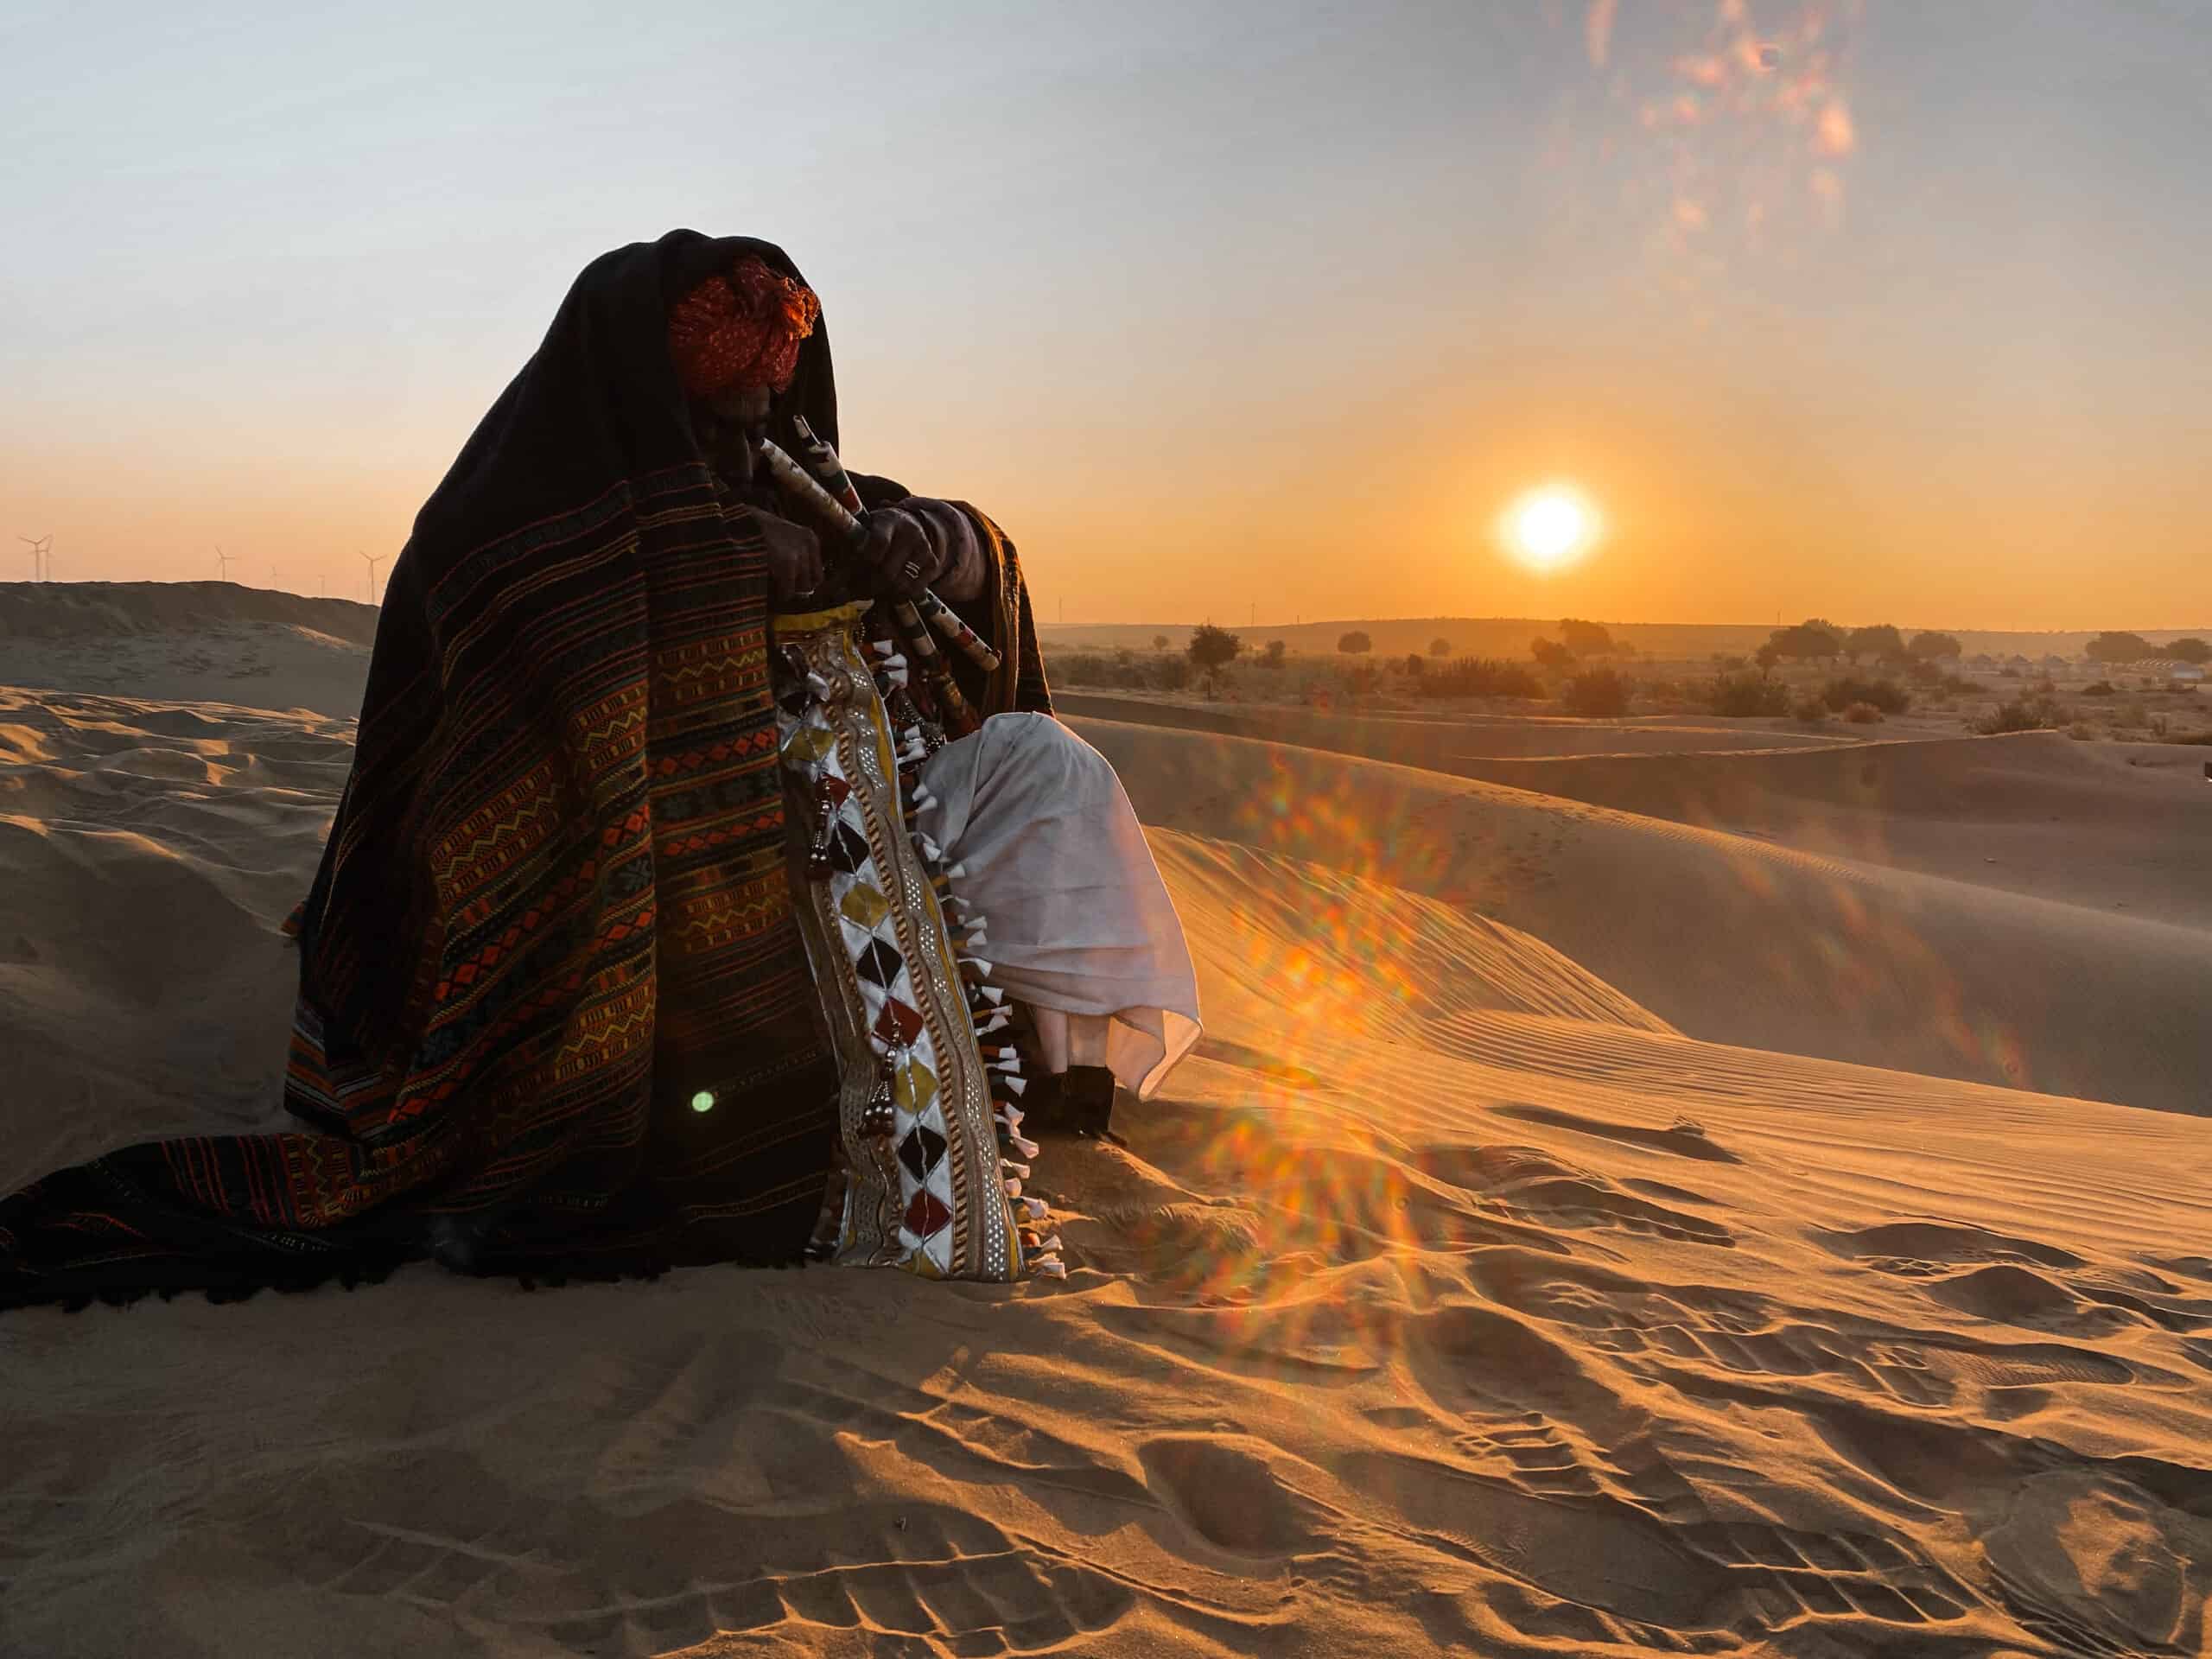 local rajasthani man covered in blankets playing a flute in the desert at sunrise